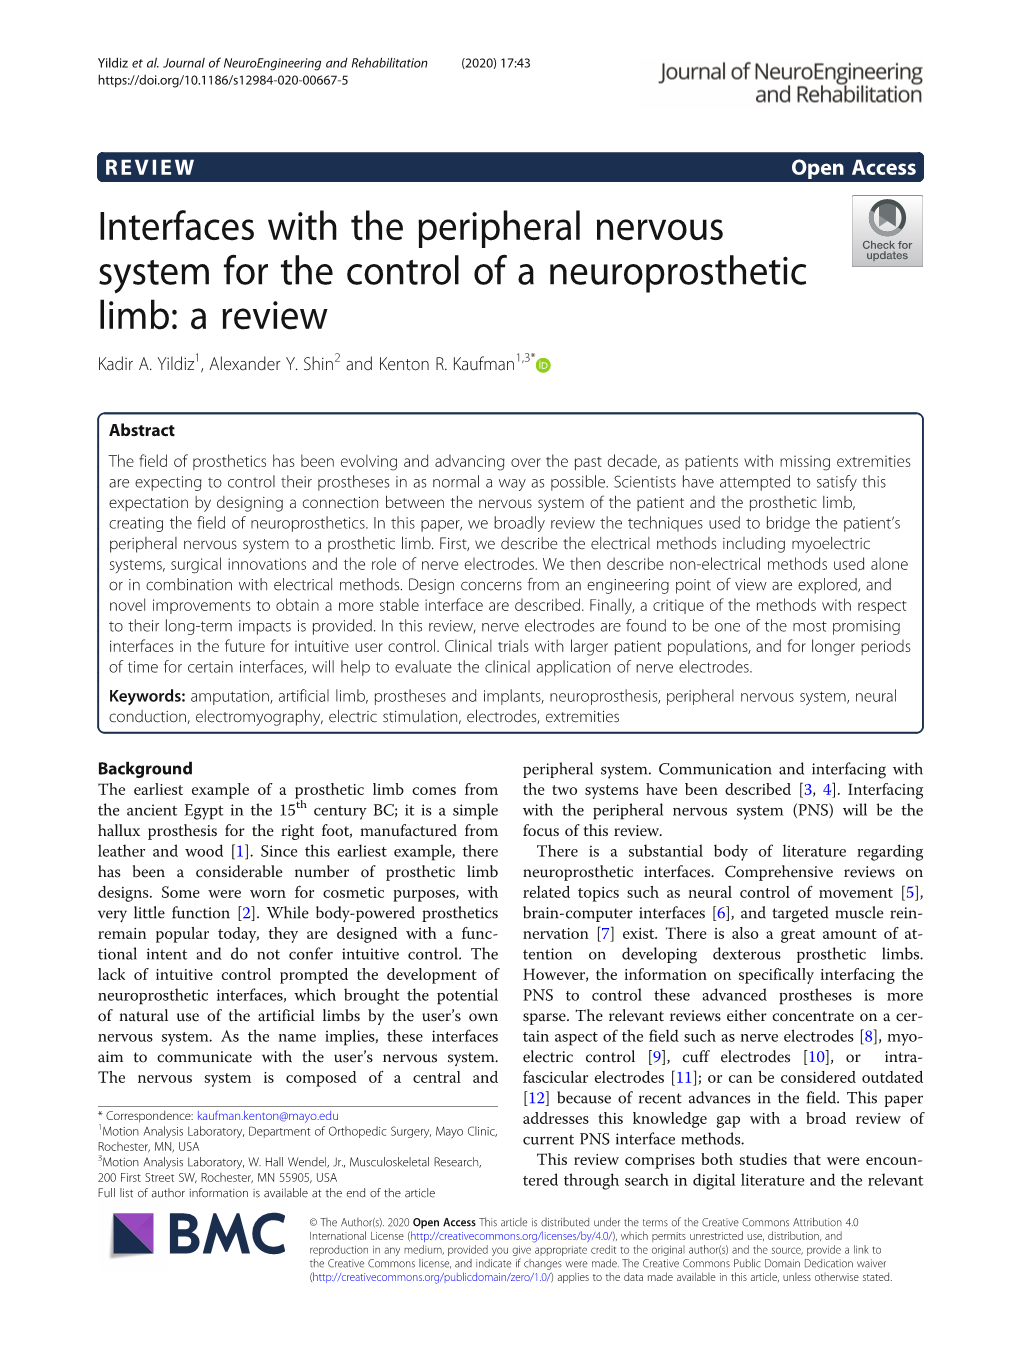 Interfaces with the Peripheral Nervous System for the Control of a Neuroprosthetic Limb: a Review Kadir A